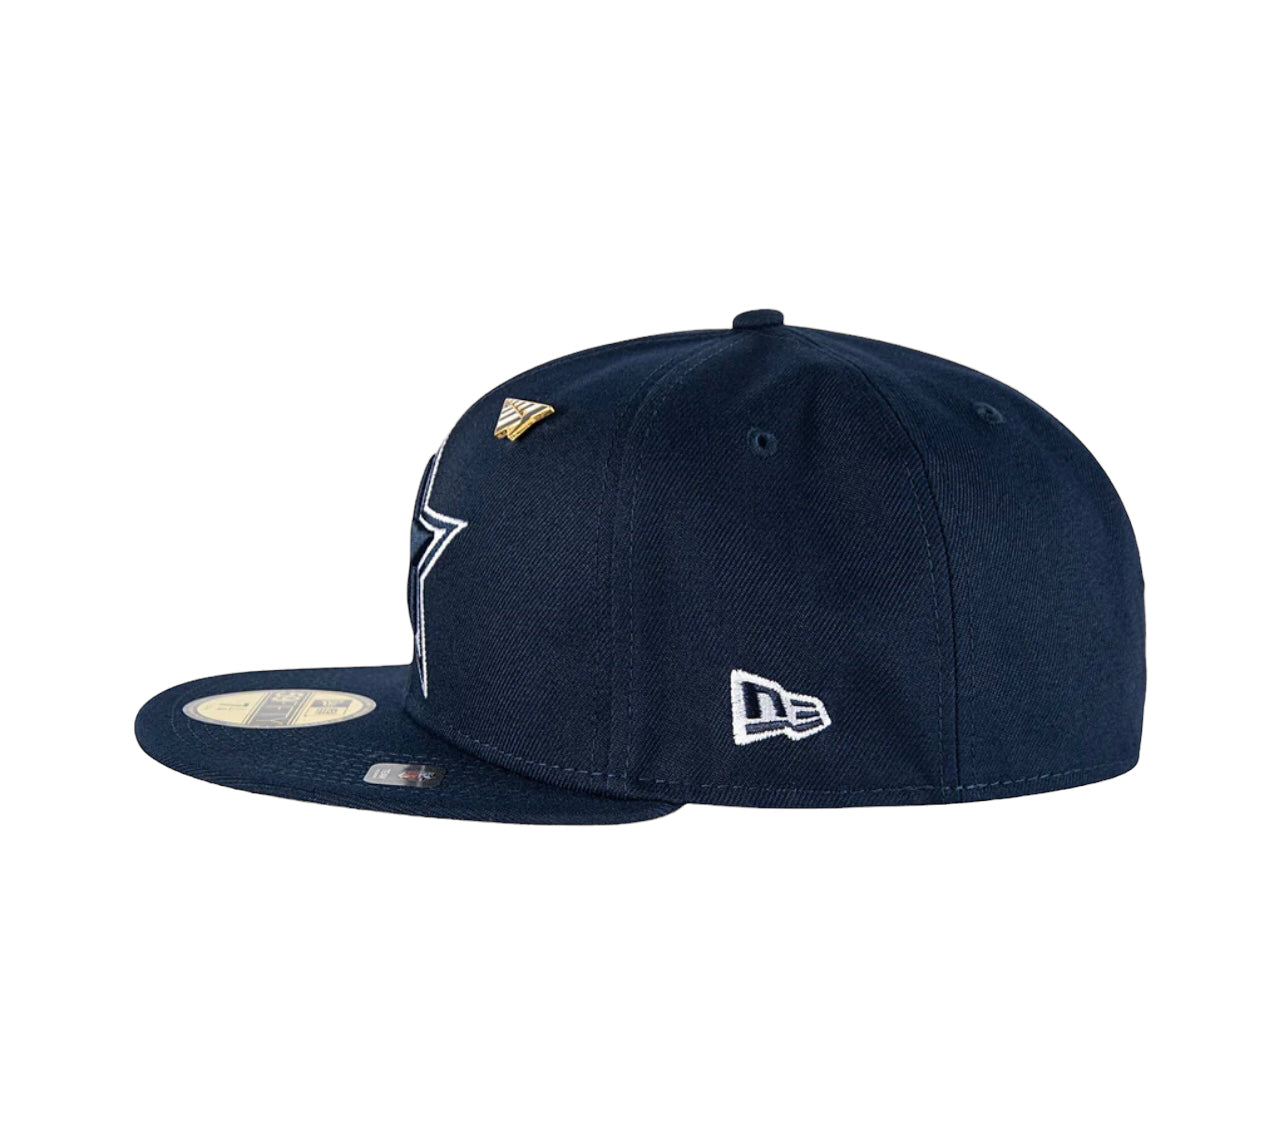 PAPER PLANES X DALLAS COWBOYS 59FIFTY FITTED